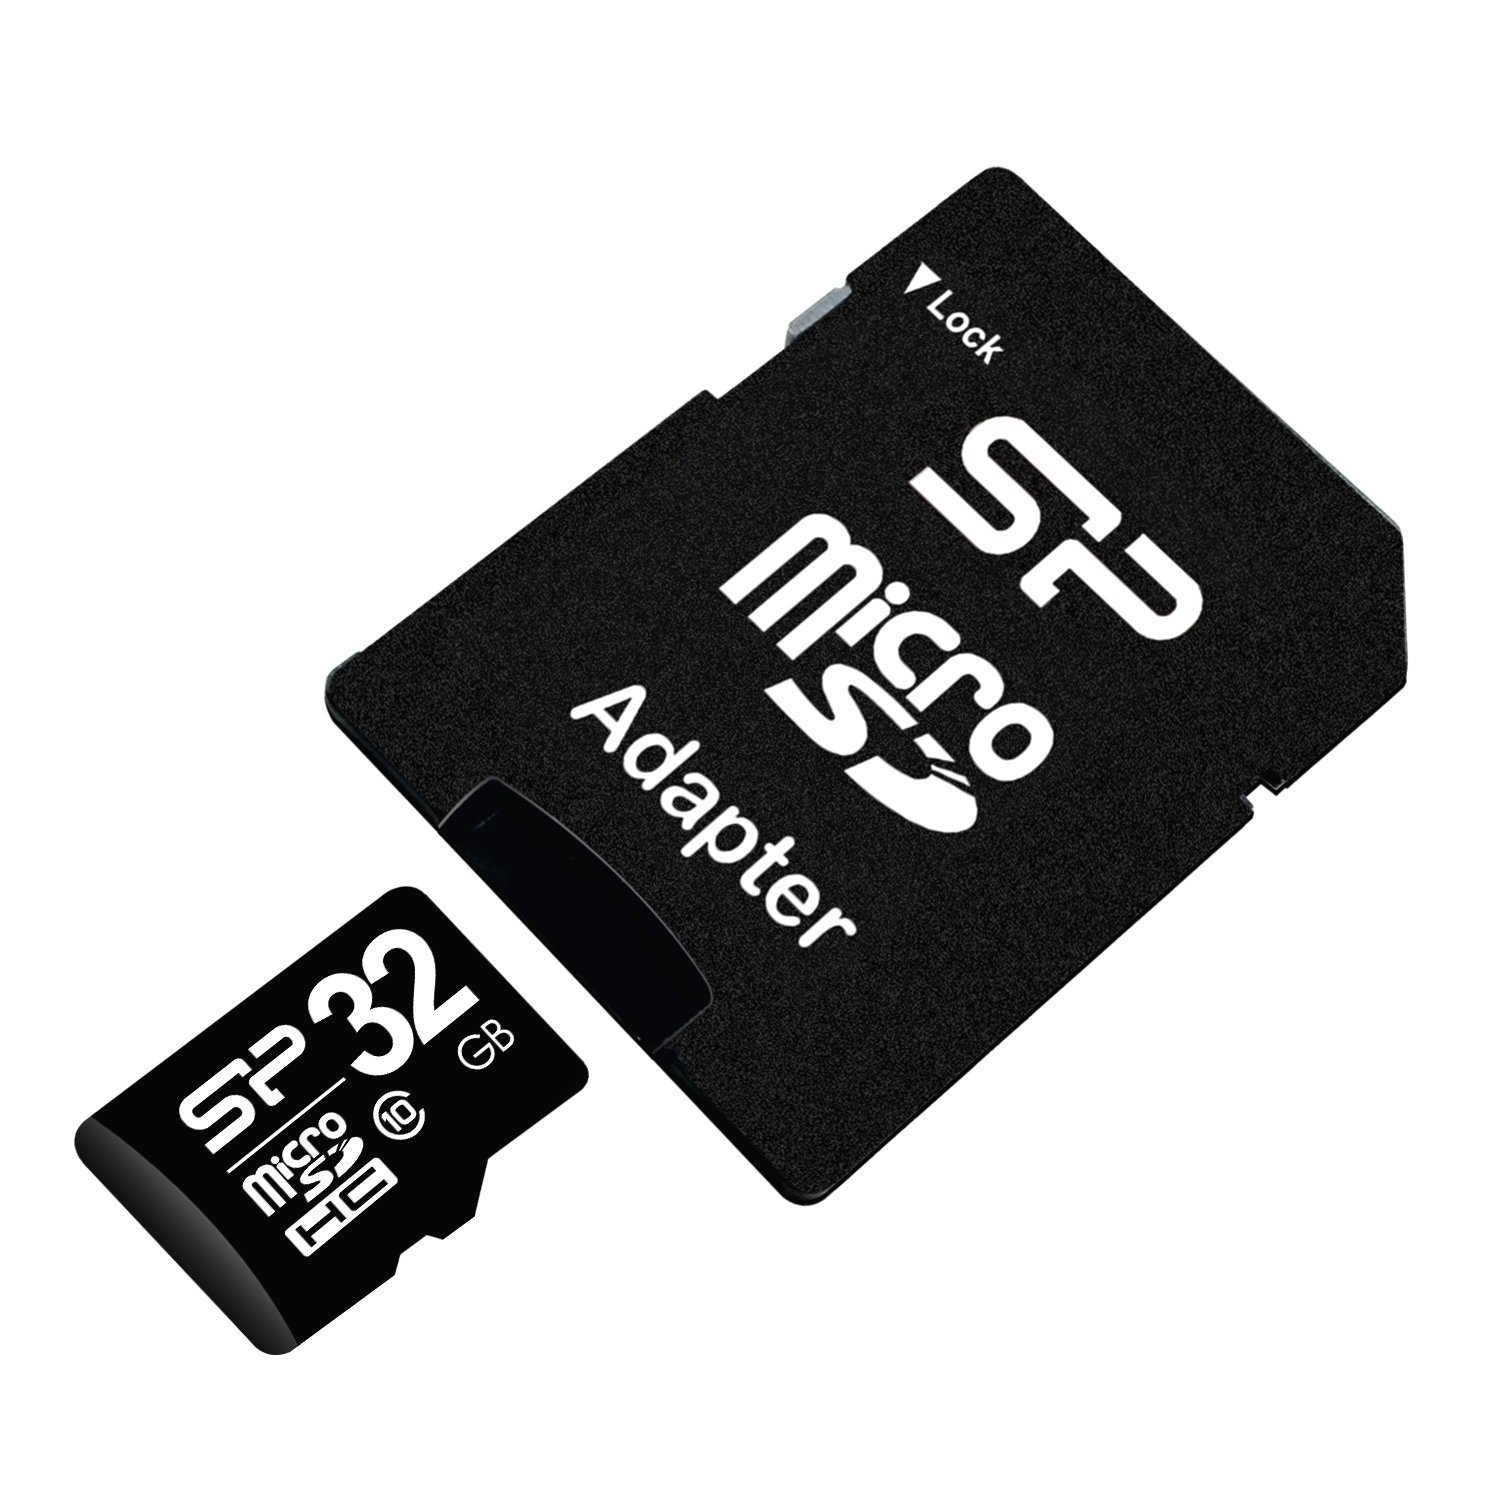 MicroSD Card 32GB Silicon Power SDHC CL.10 inkl. Adapter